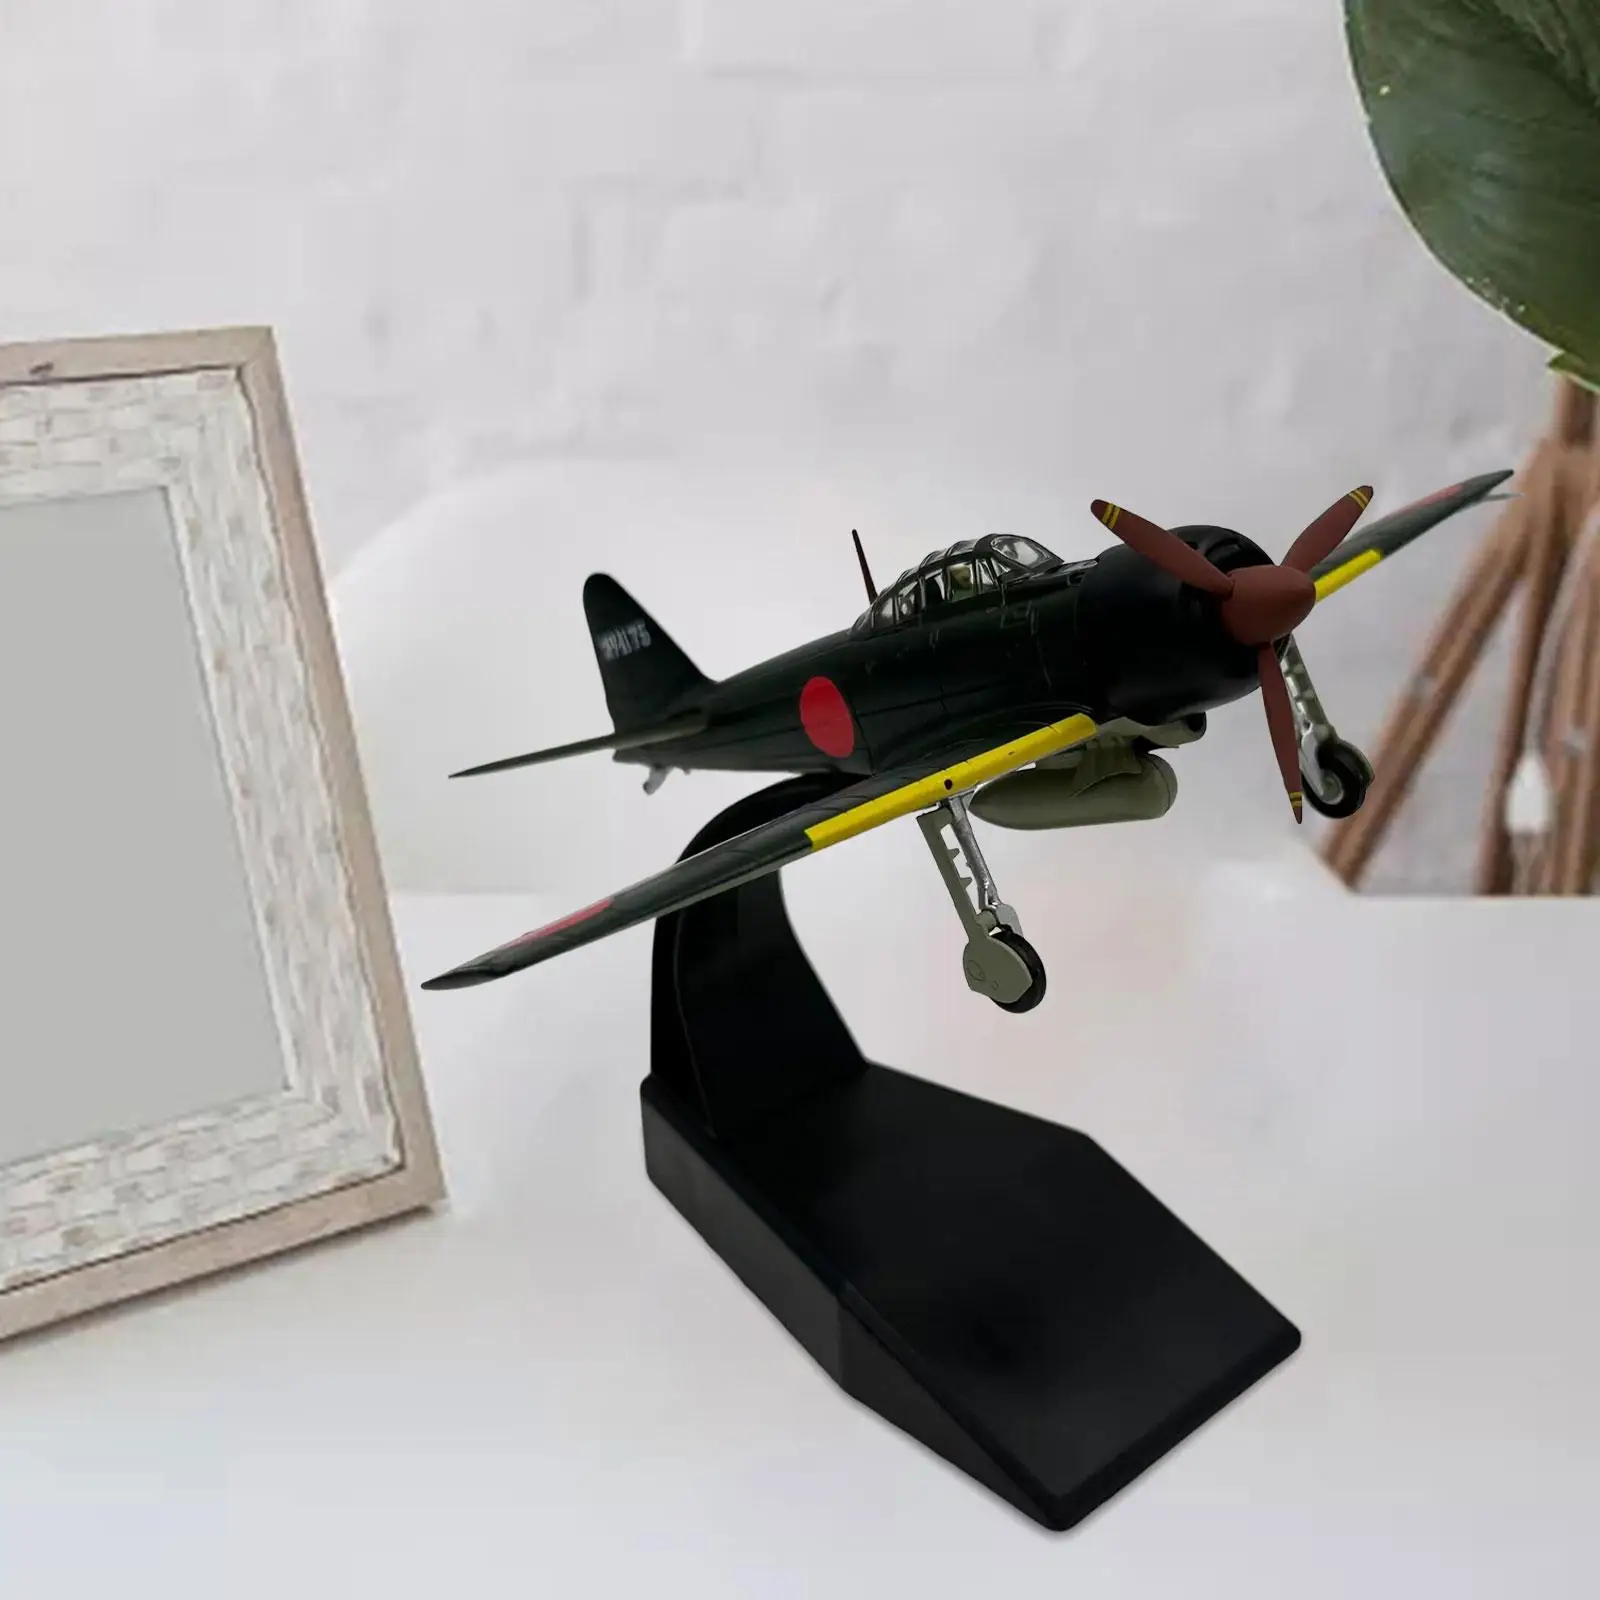 1/72 Alloy Plane Model Display Ornaments Collectables Ornaments Aircraft Plane Model for Desktop Office Bedroom Table Ornament